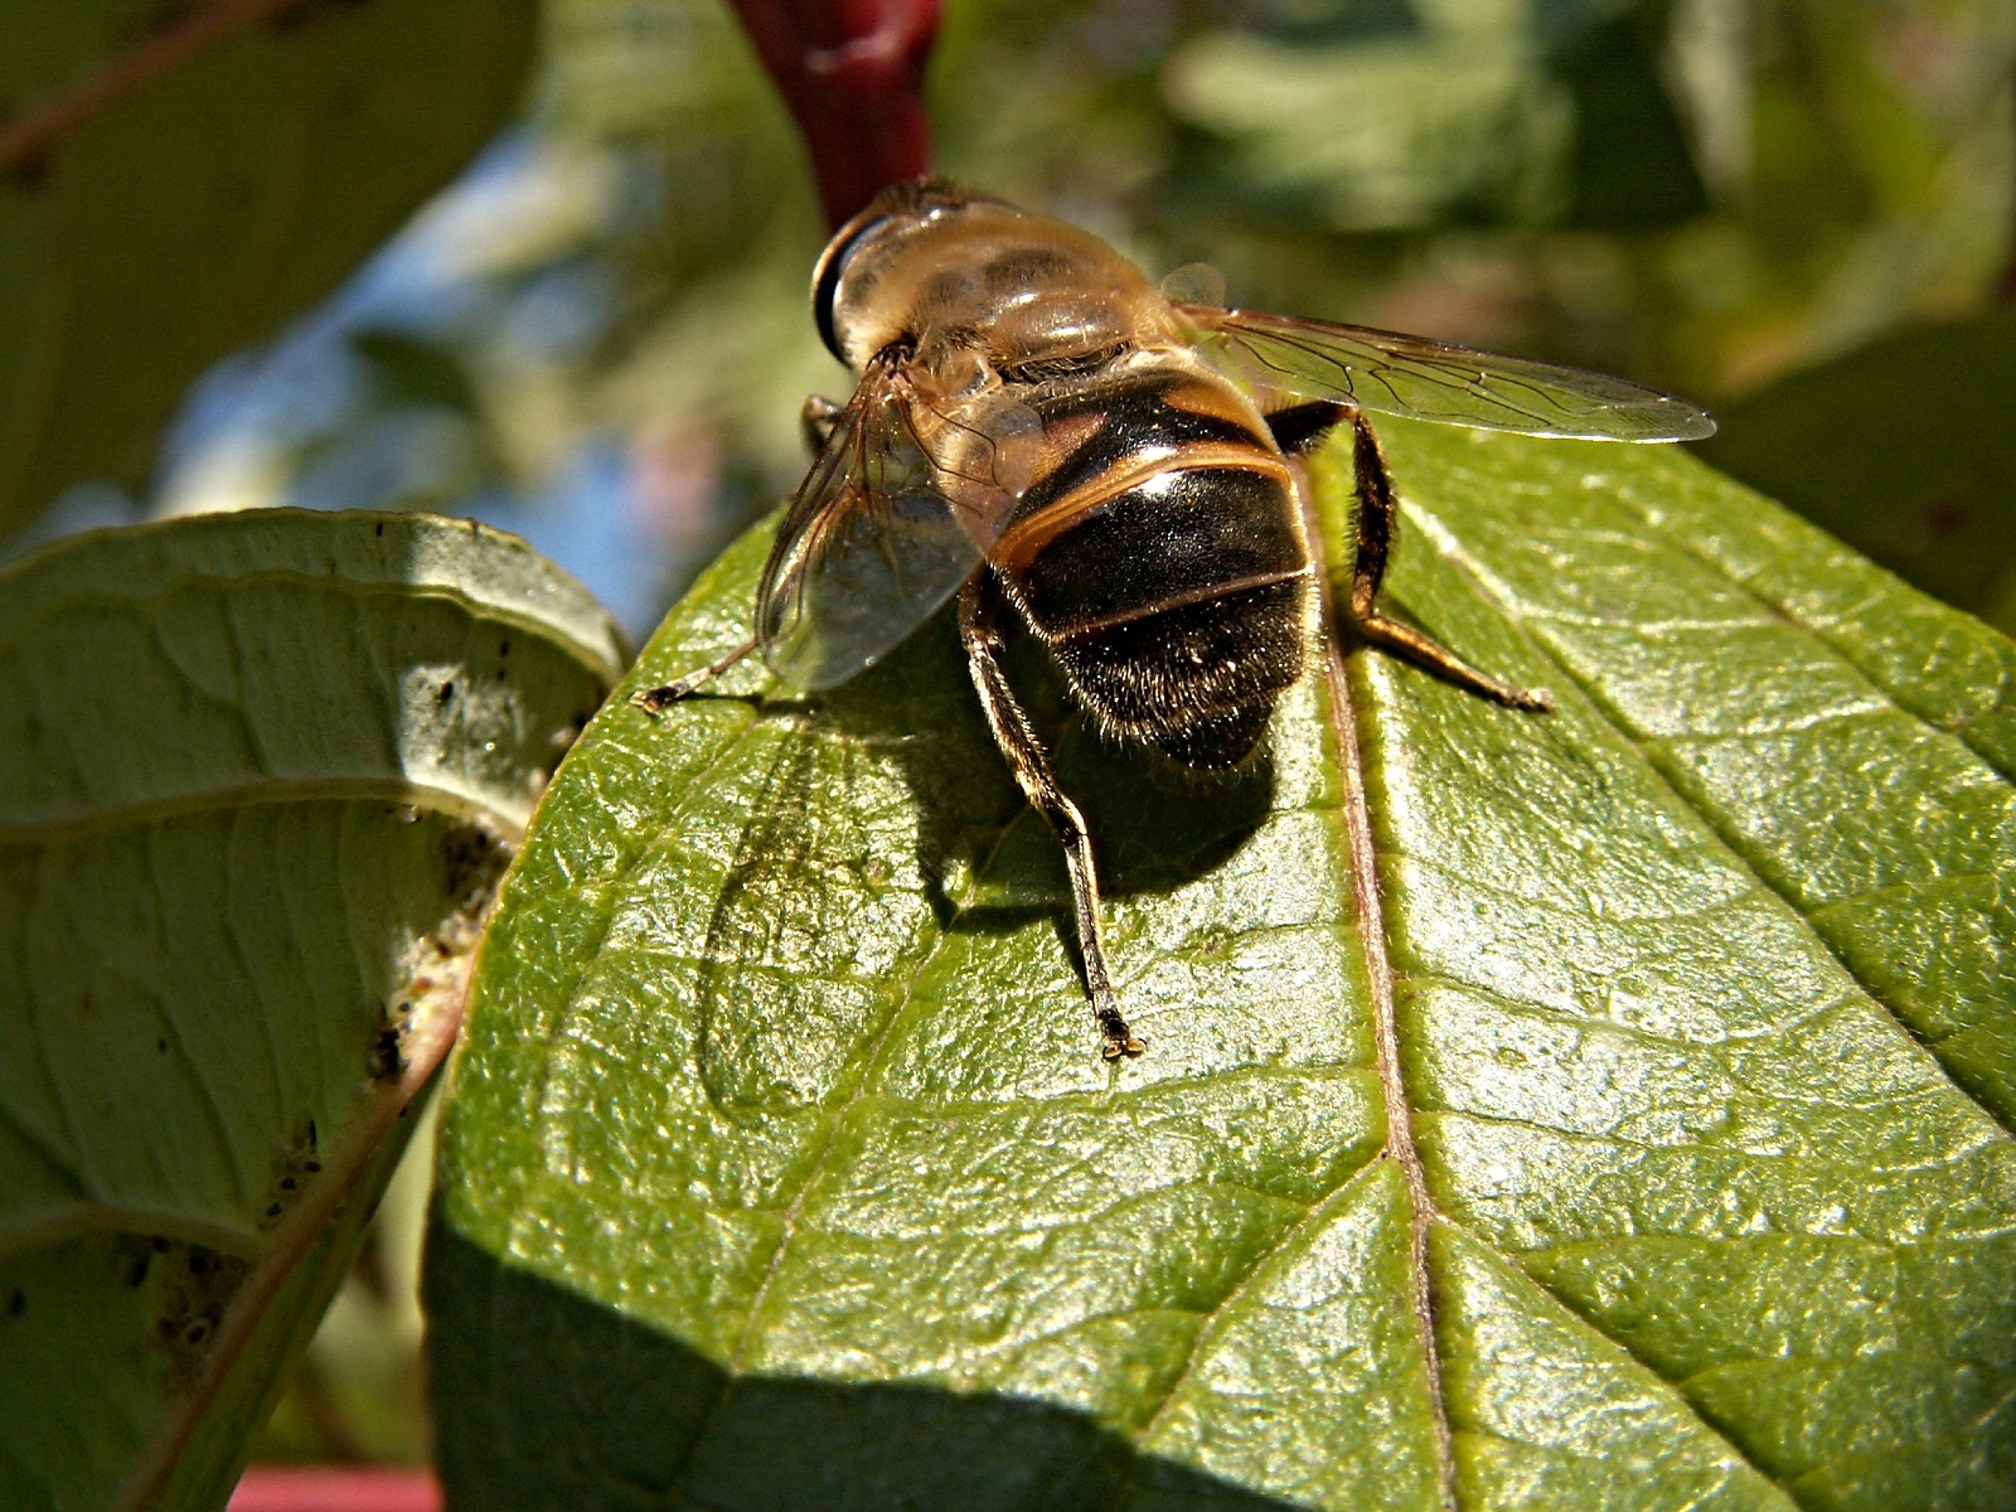 Hover fly perched on green leaf